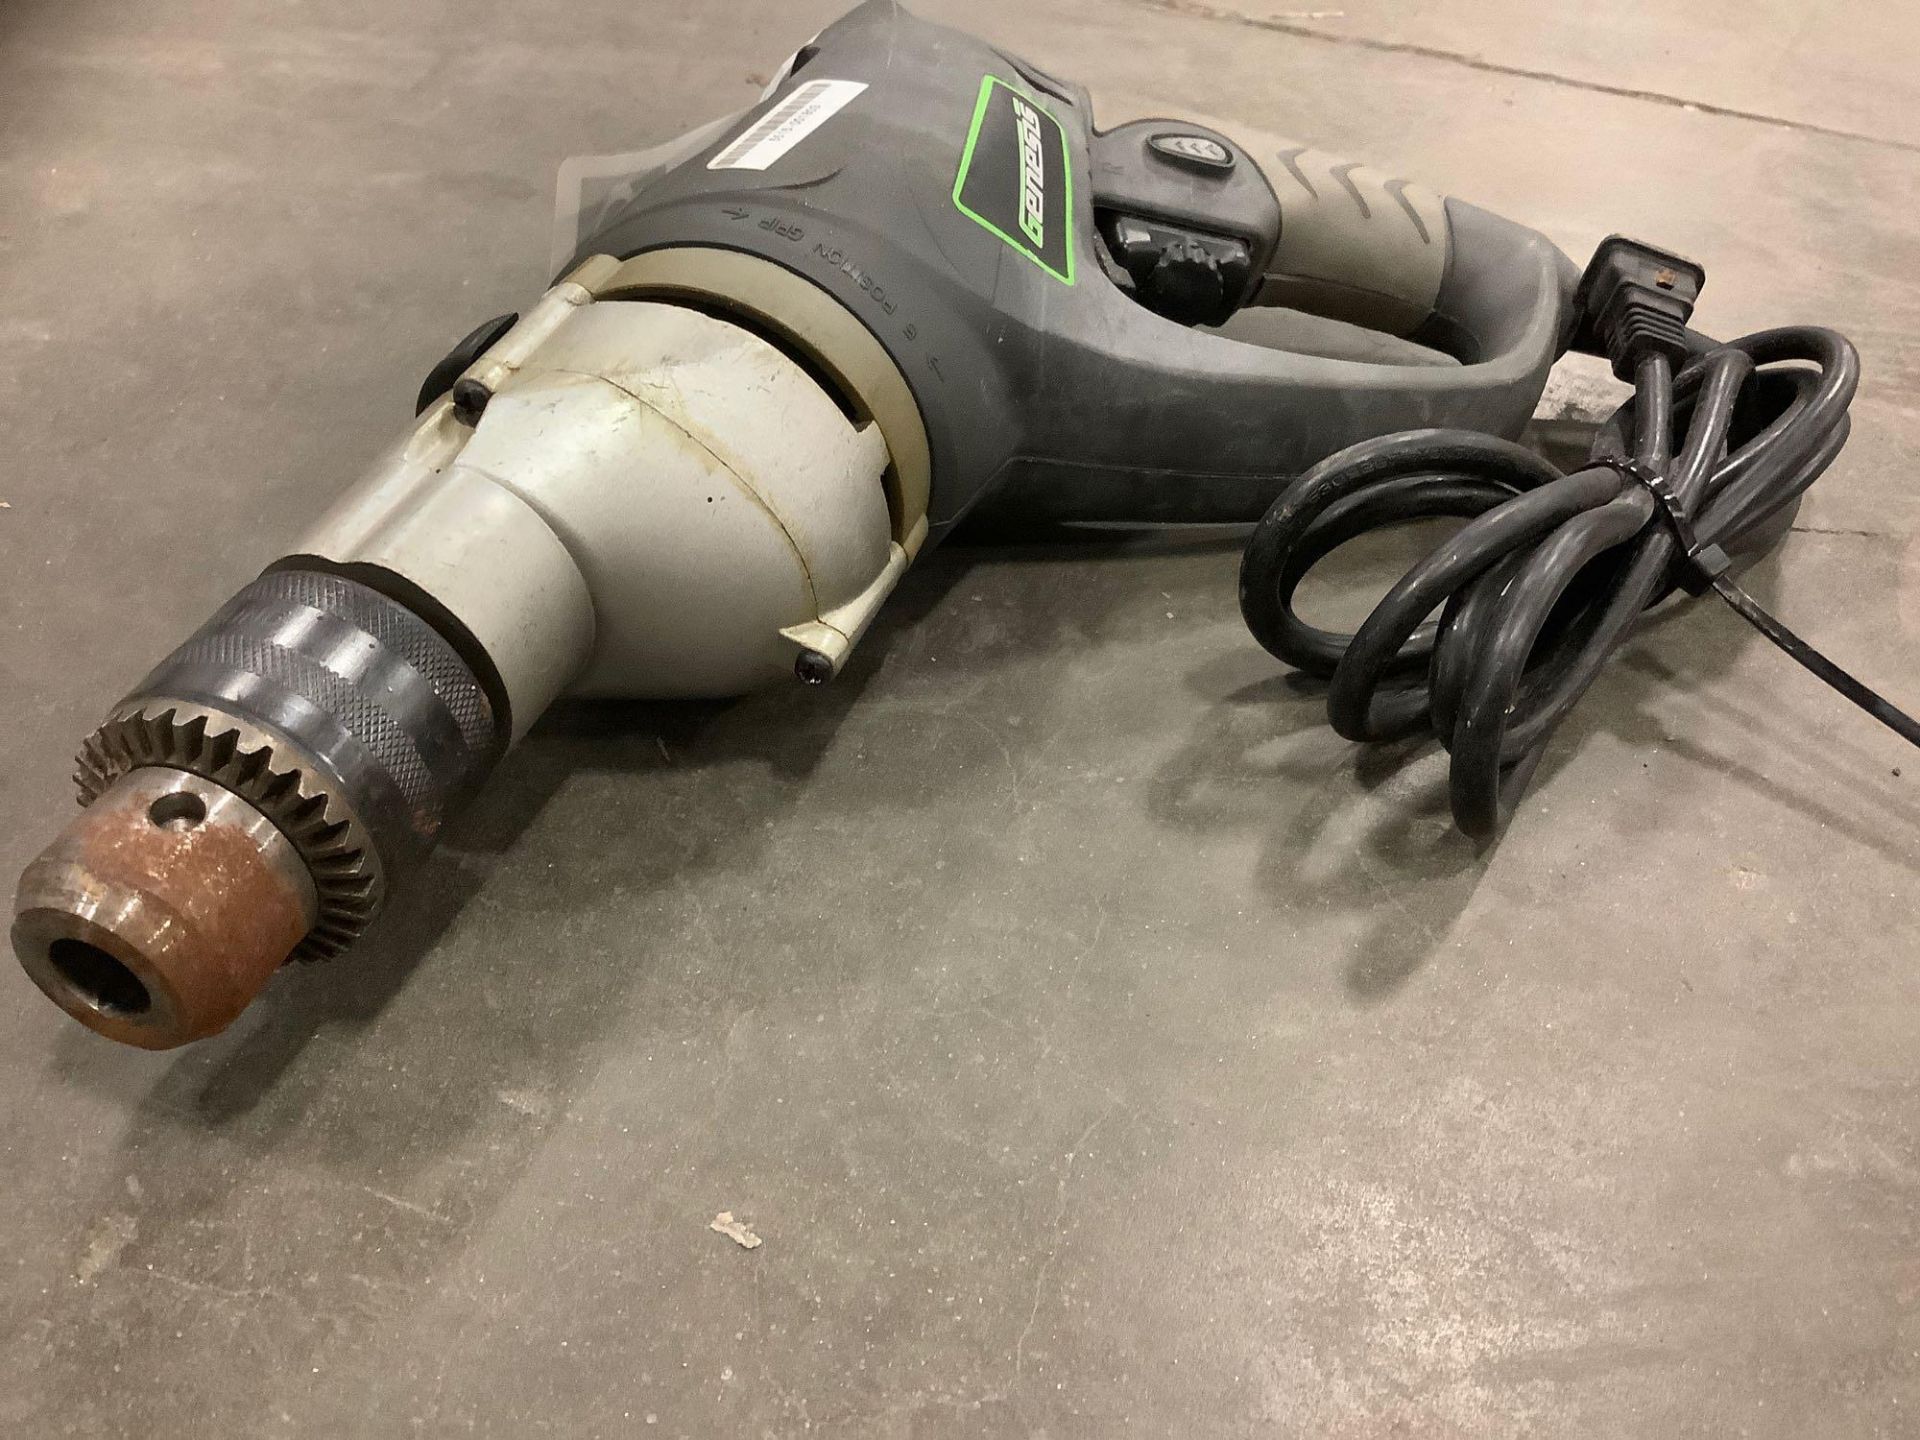 GENESIS 1/2” 6.0 AMP HAMMER DRILL MODEL GHD1260, APPROX 52,500 BPM - Image 2 of 5